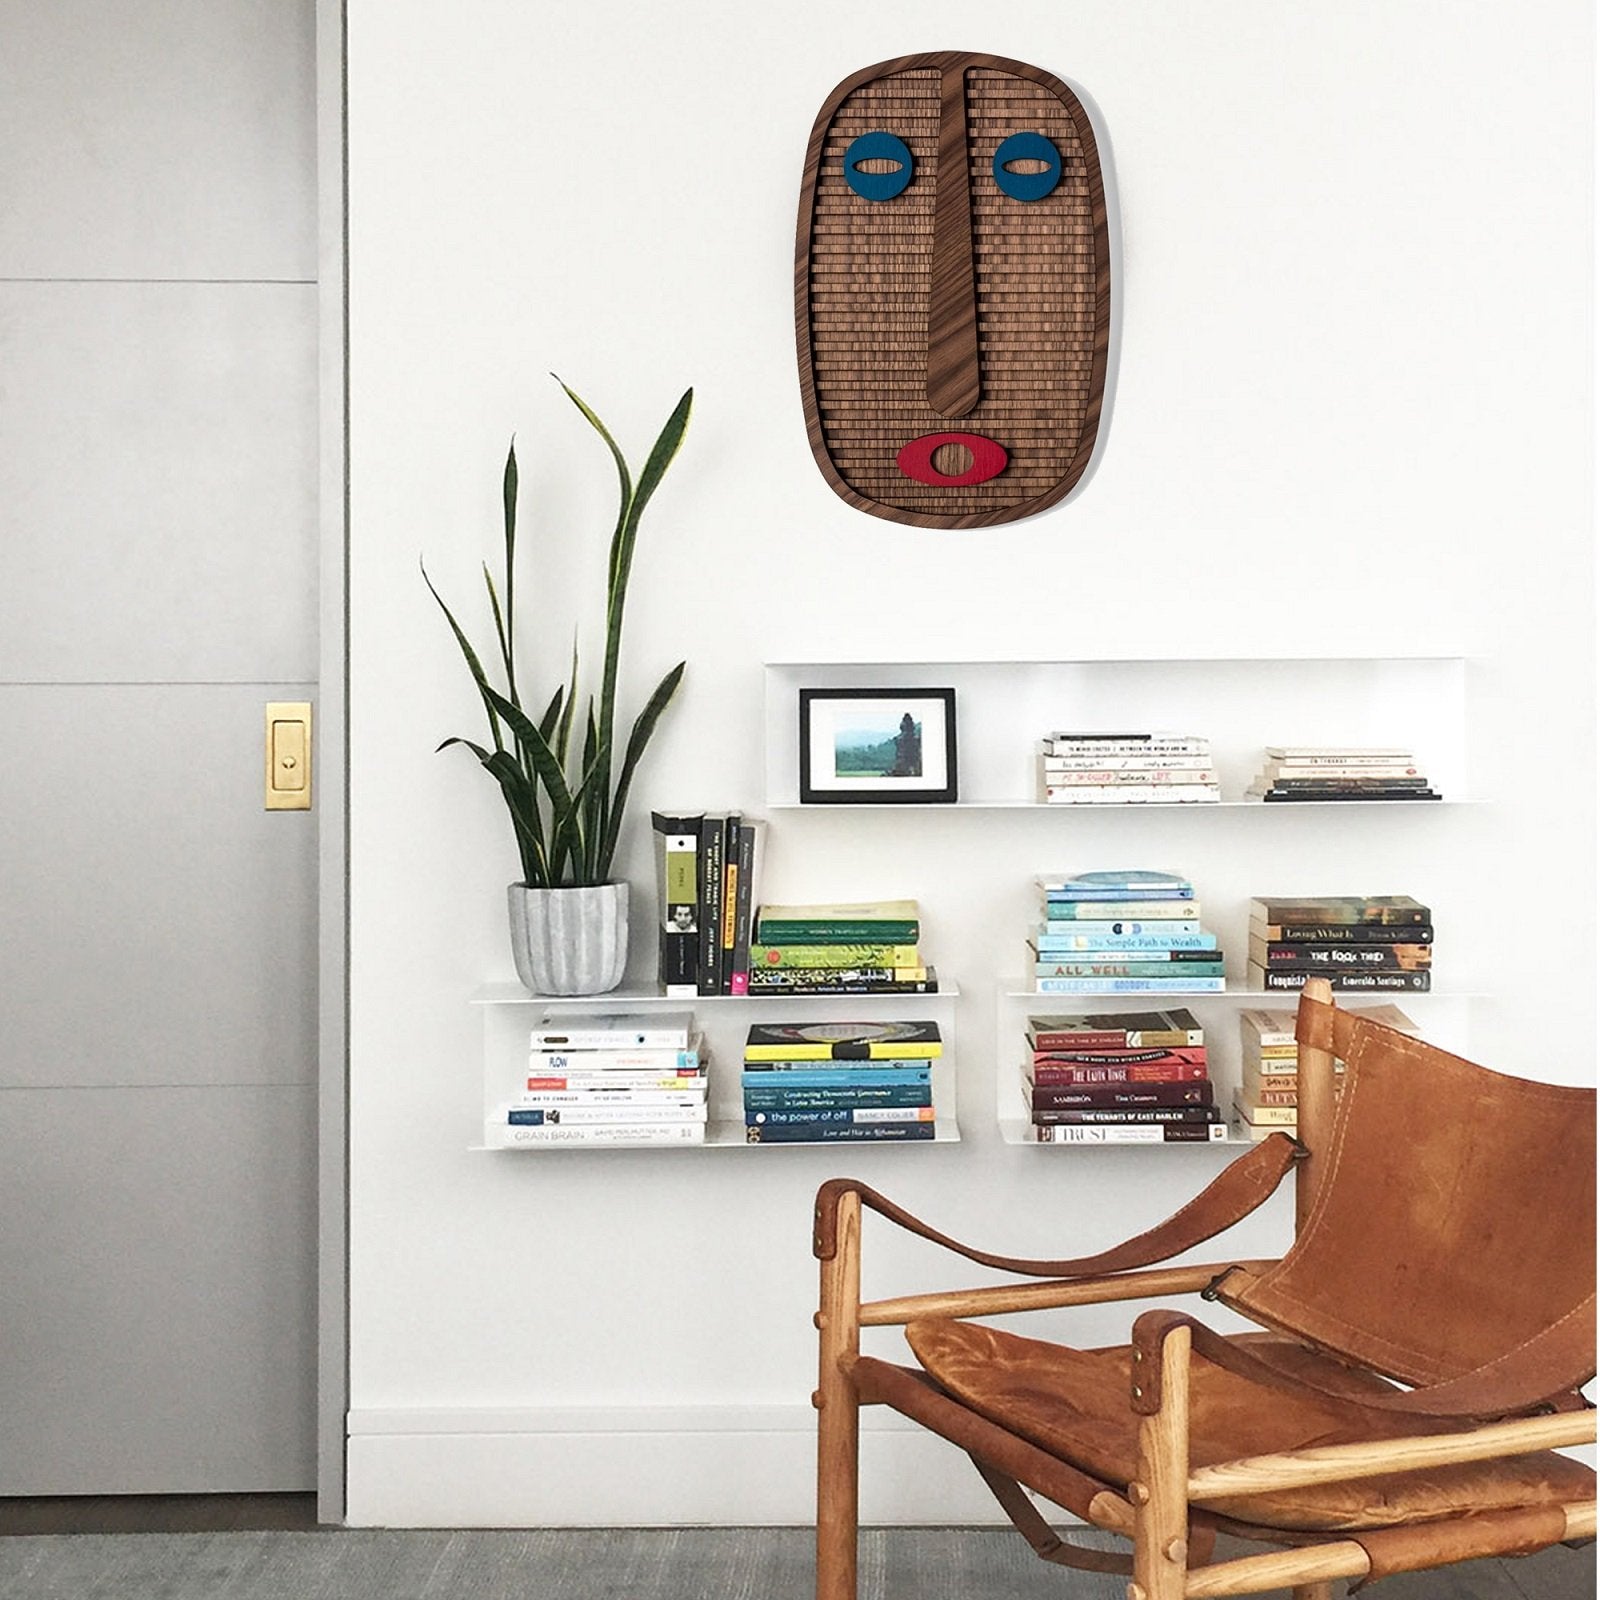 Picasso African Masks for Wall Decor by Umasqu